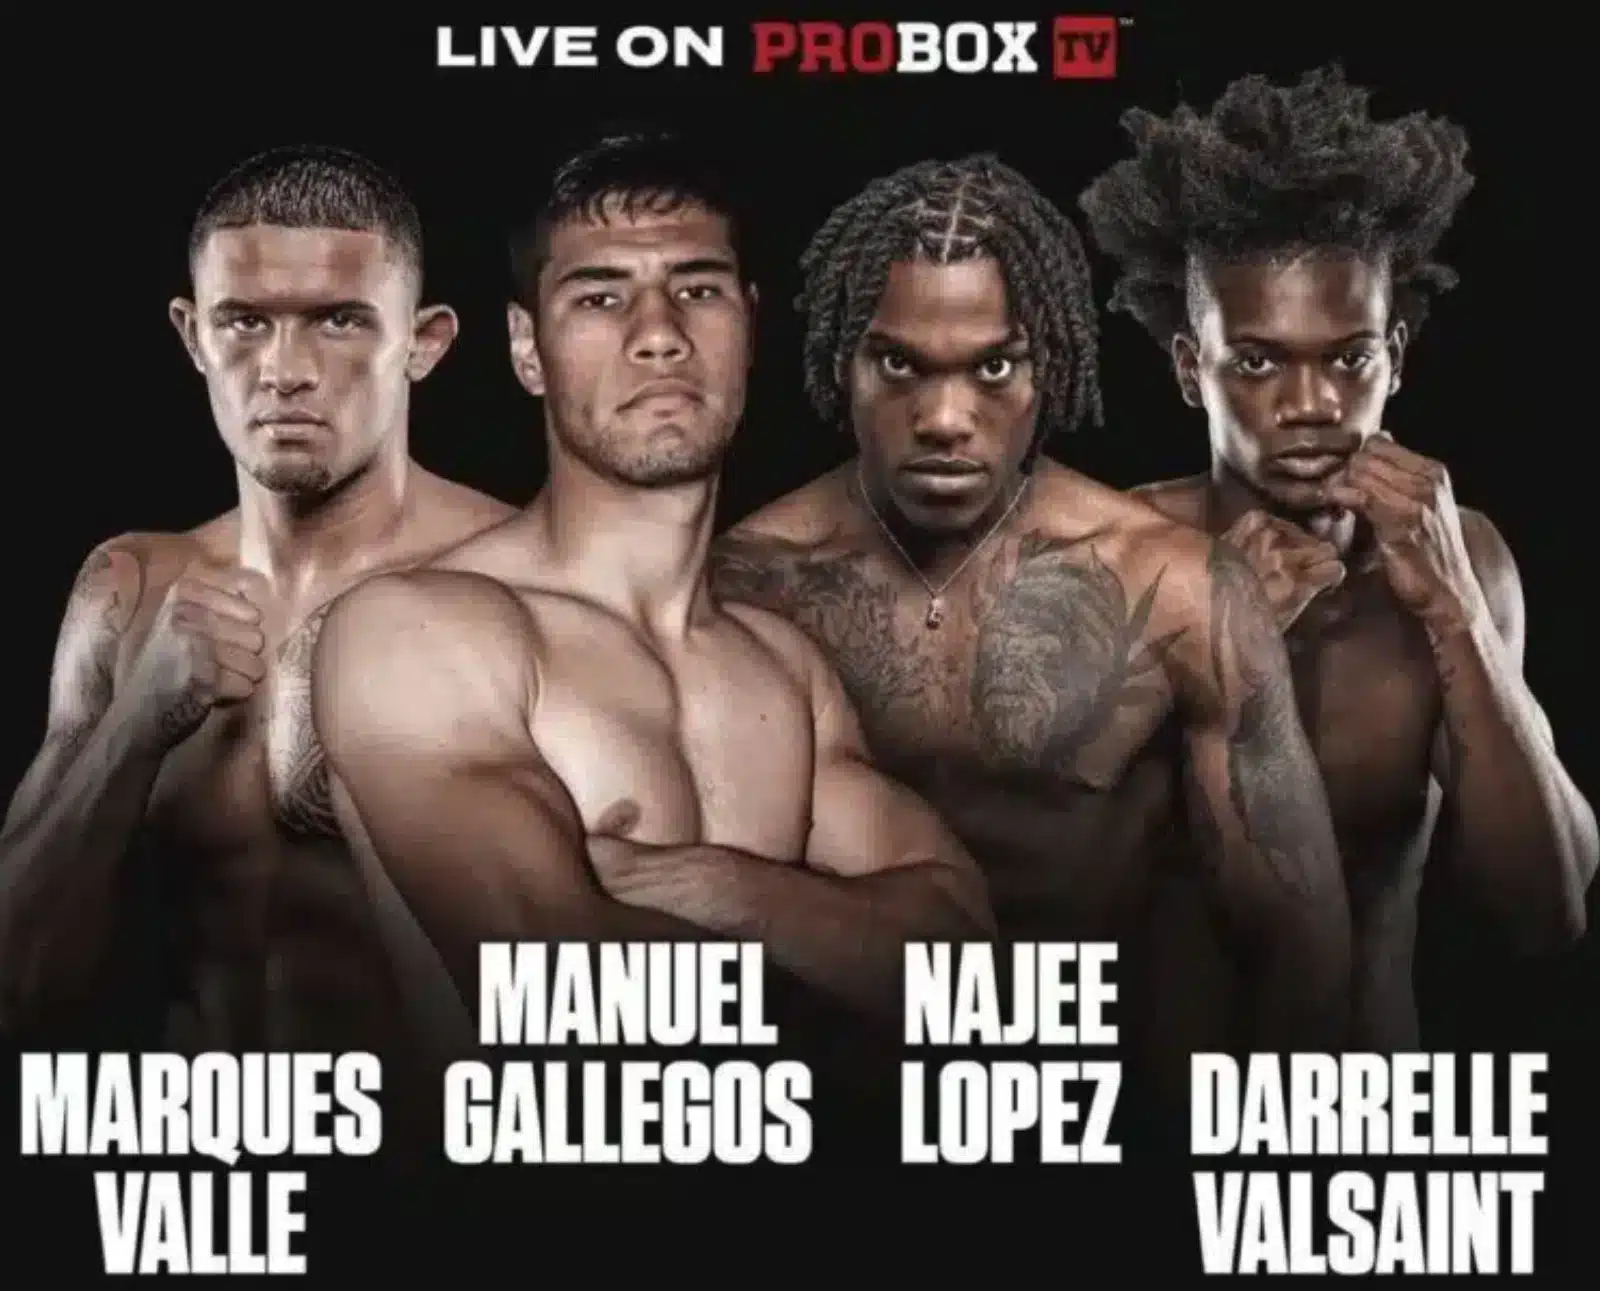 Image: What time is the Gallegos vs Vansiclen fight tonight?